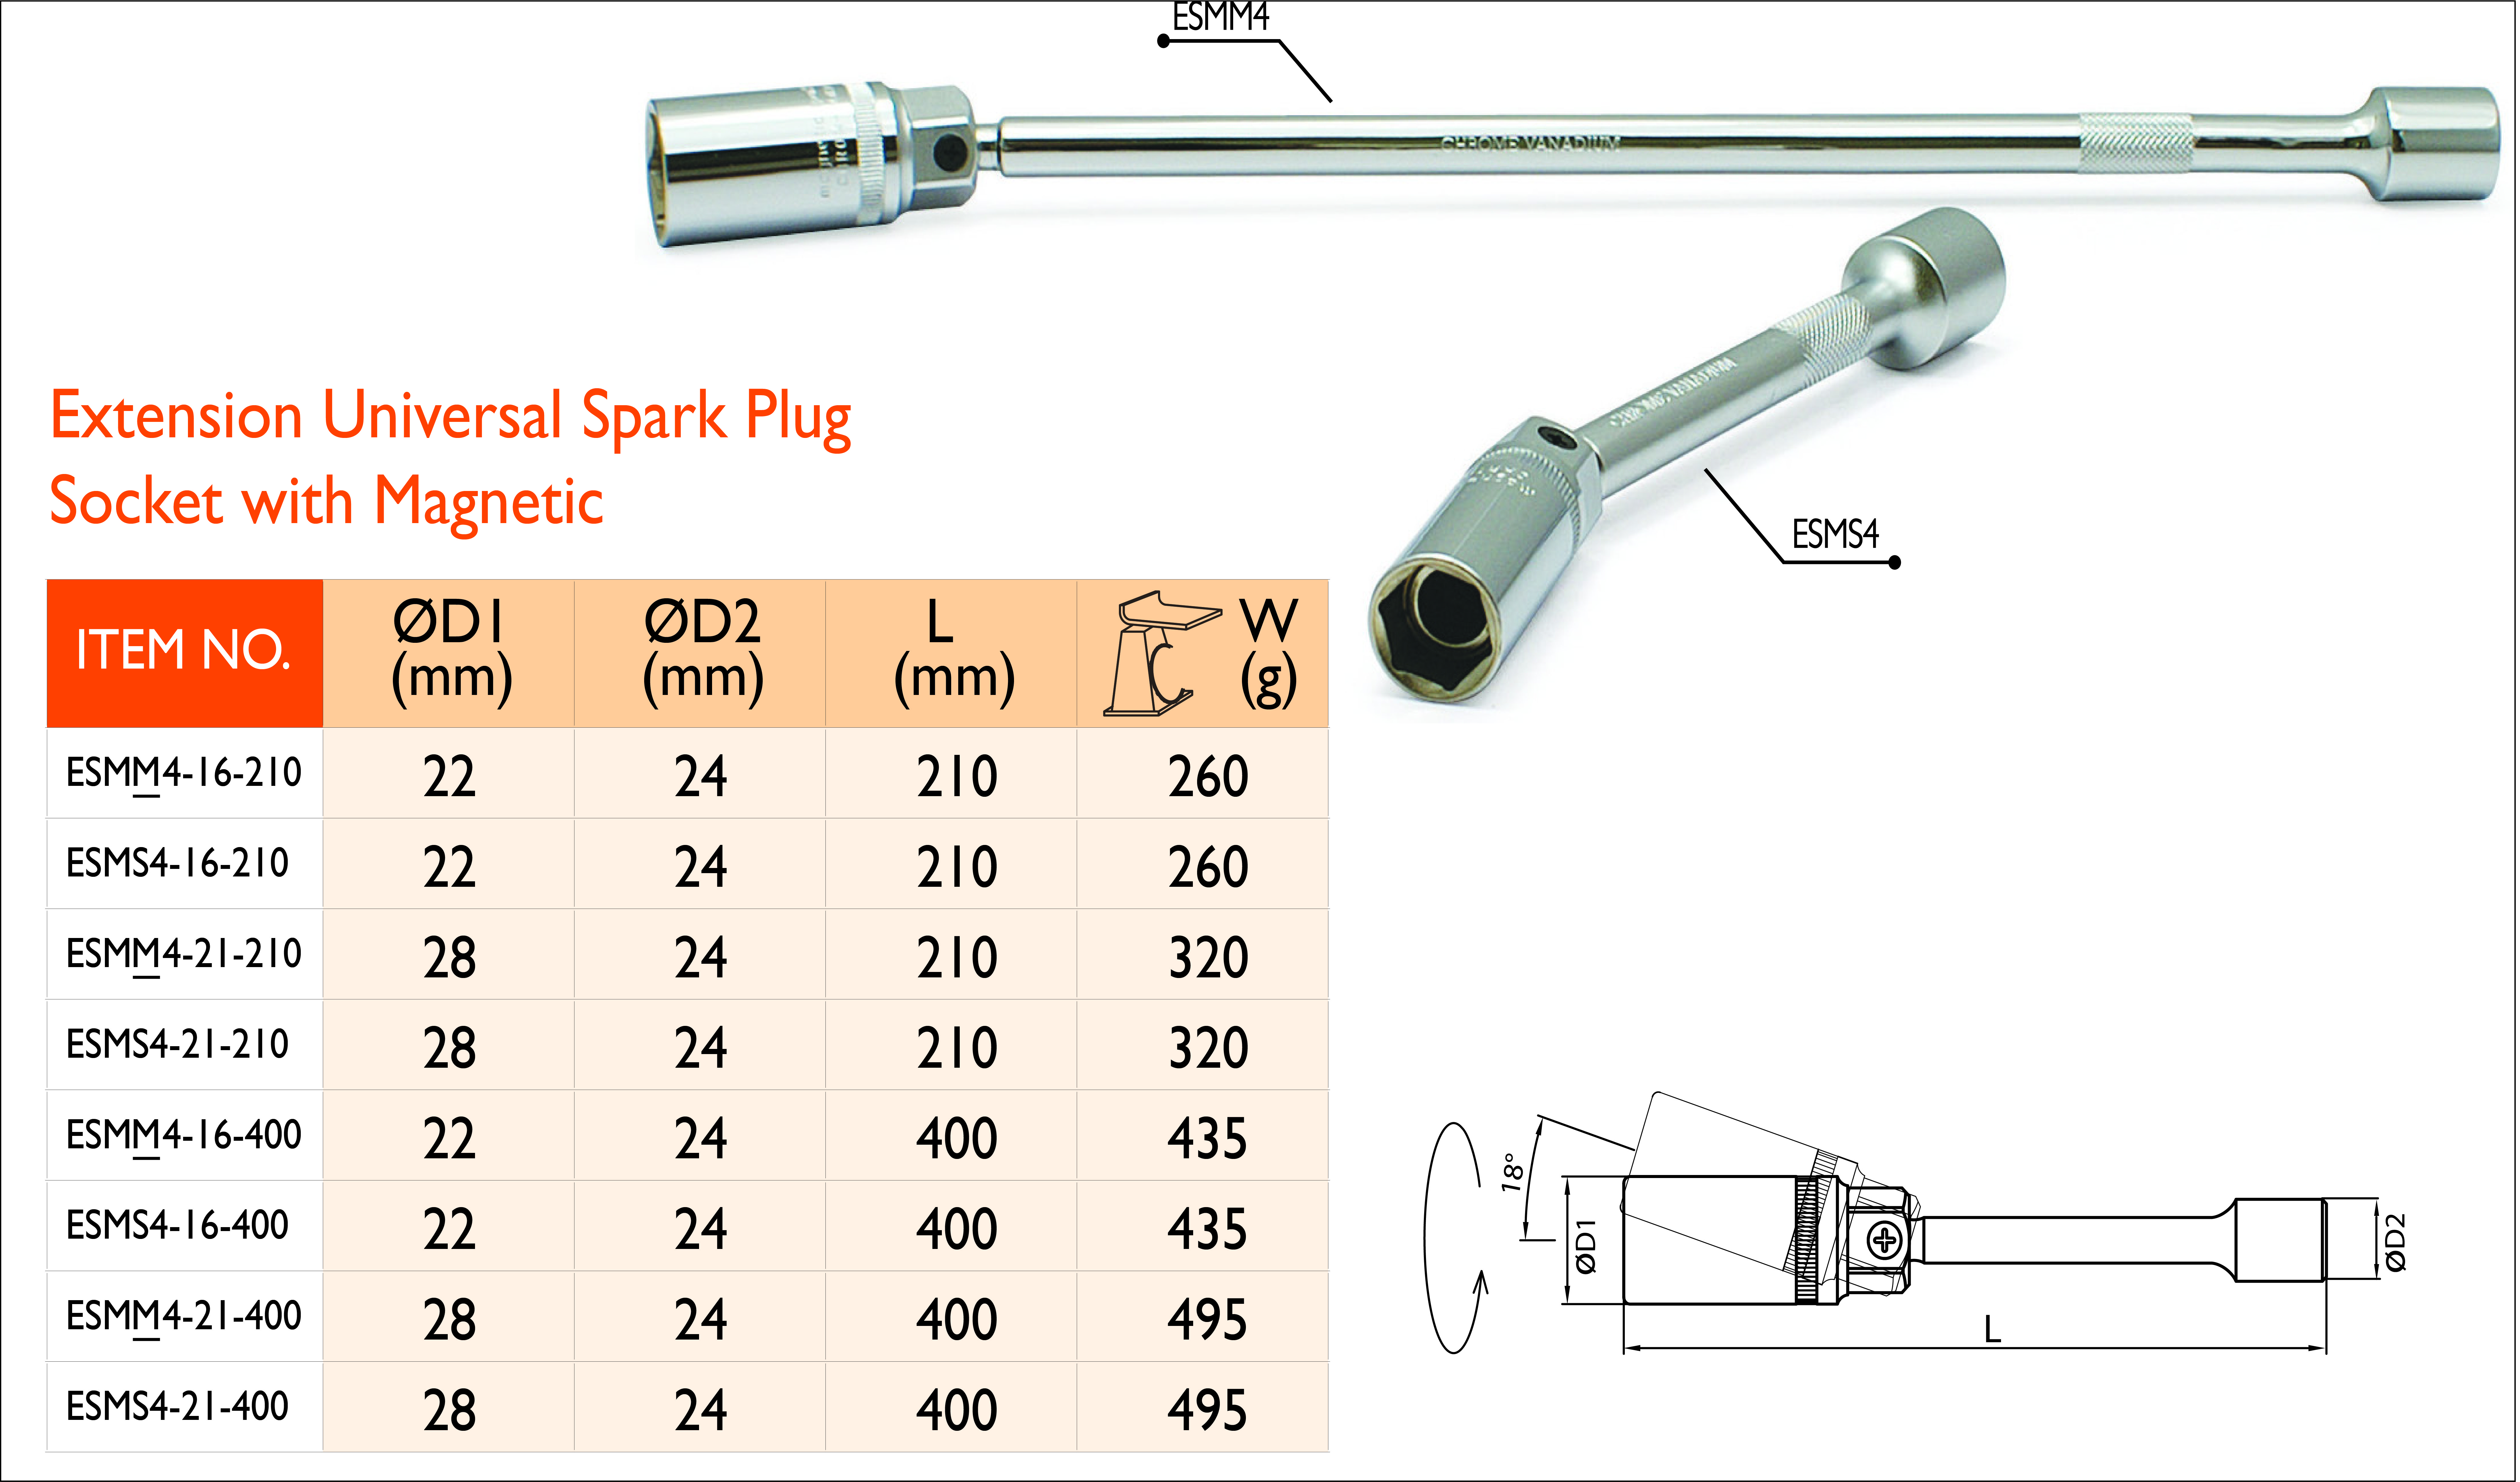 4_12 Extension Universal Spark Plug Socket with magnetic_A.jpg